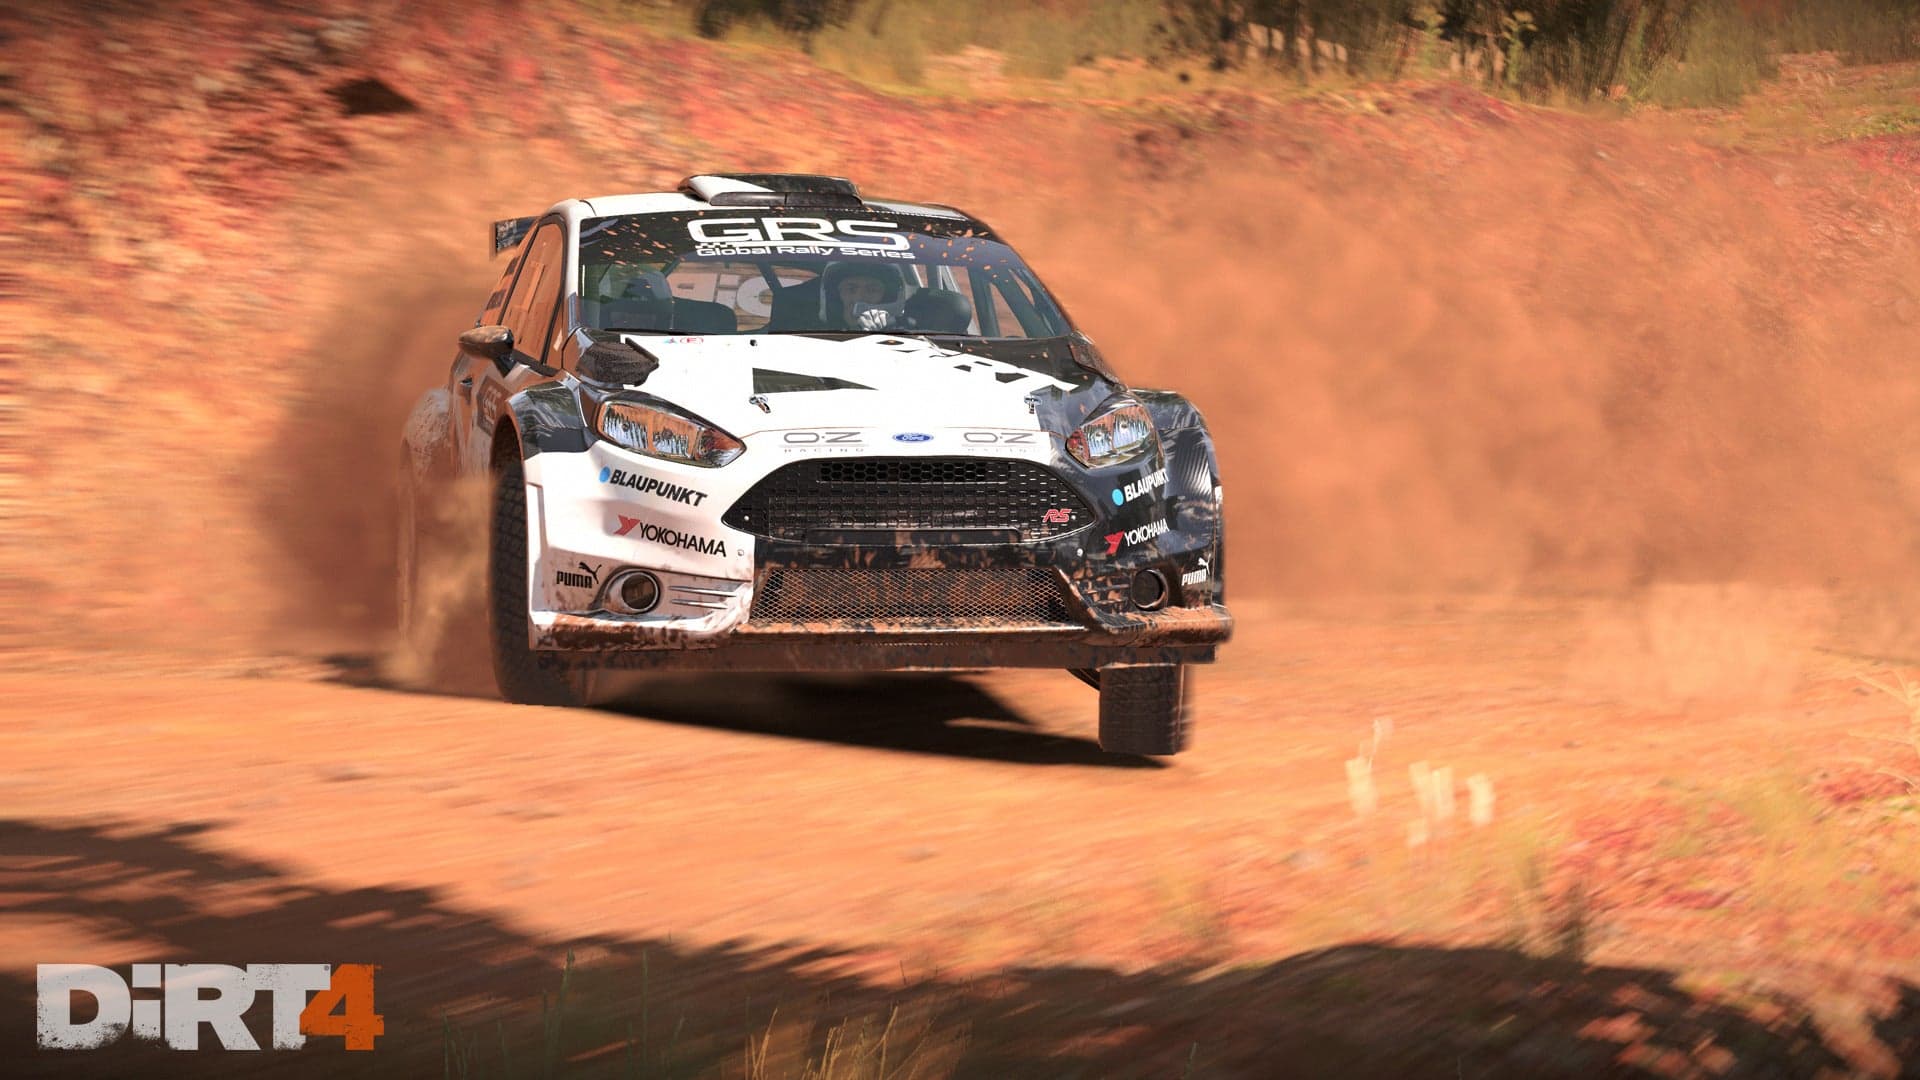 Watch the New Gameplay Trailer for DiRT 4